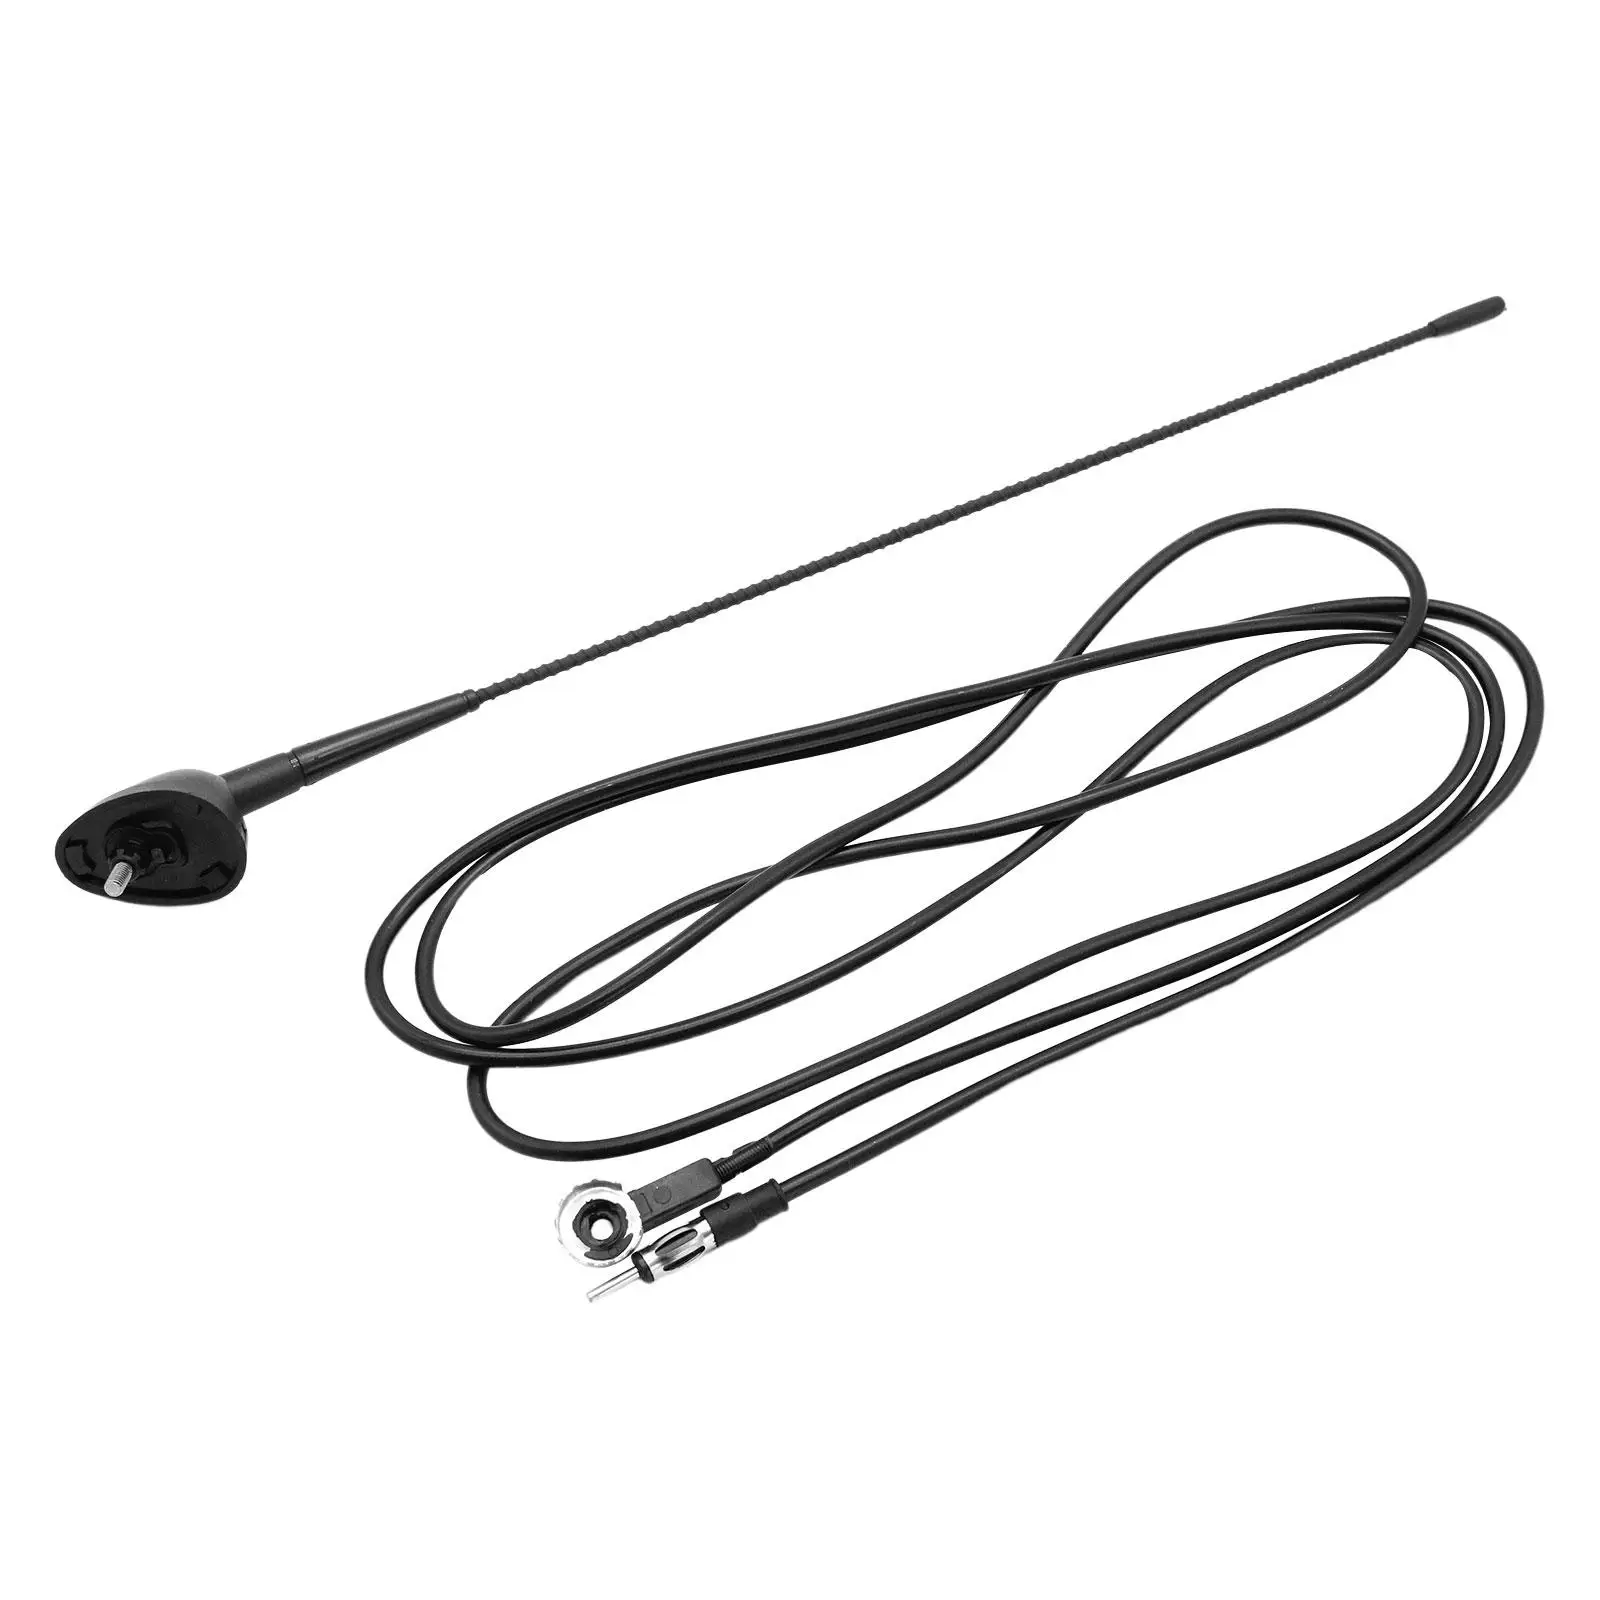 Front Roof Antenna Mast Cable 2858939969 High Performance Flexible Directly Replace for Fiat PUNTO Brava Ducato Bravo Ritmo